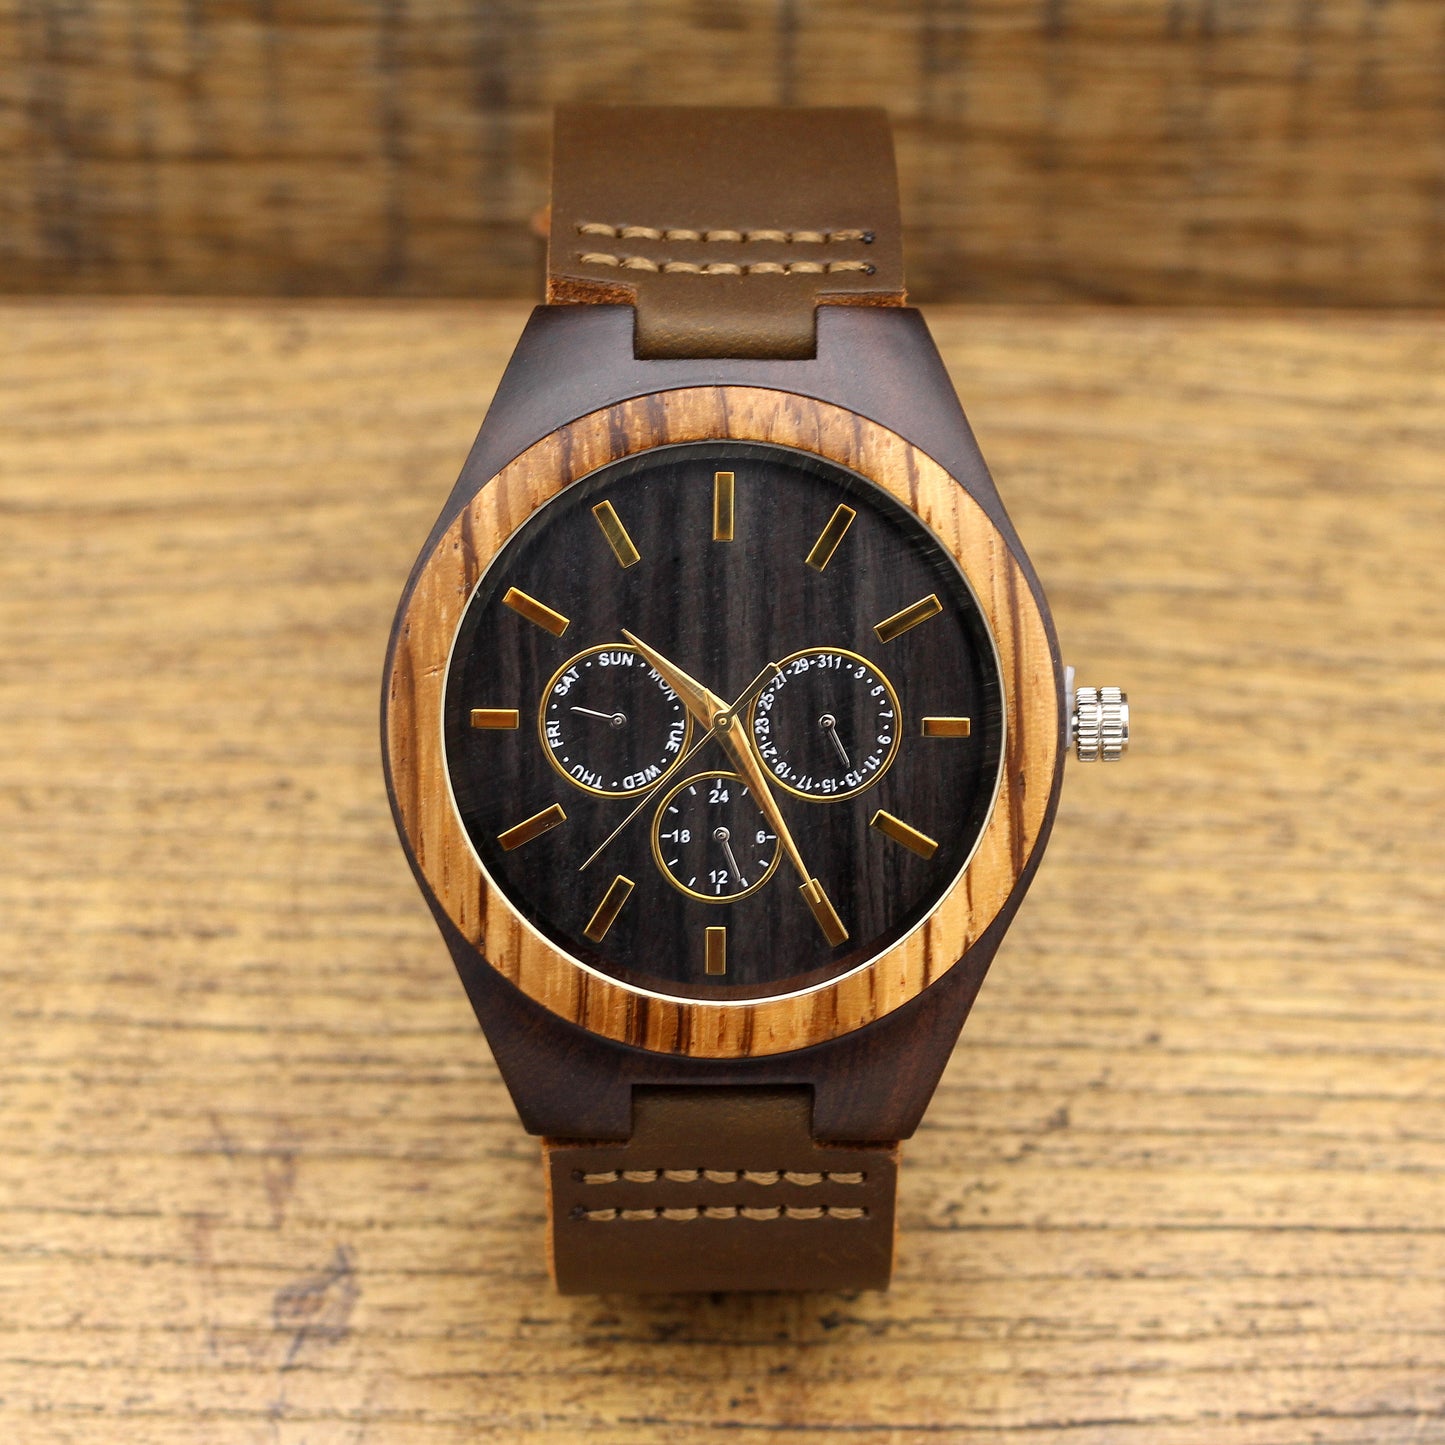 MANLY JONES Men's Ebony Wood Watch with Leather Strap